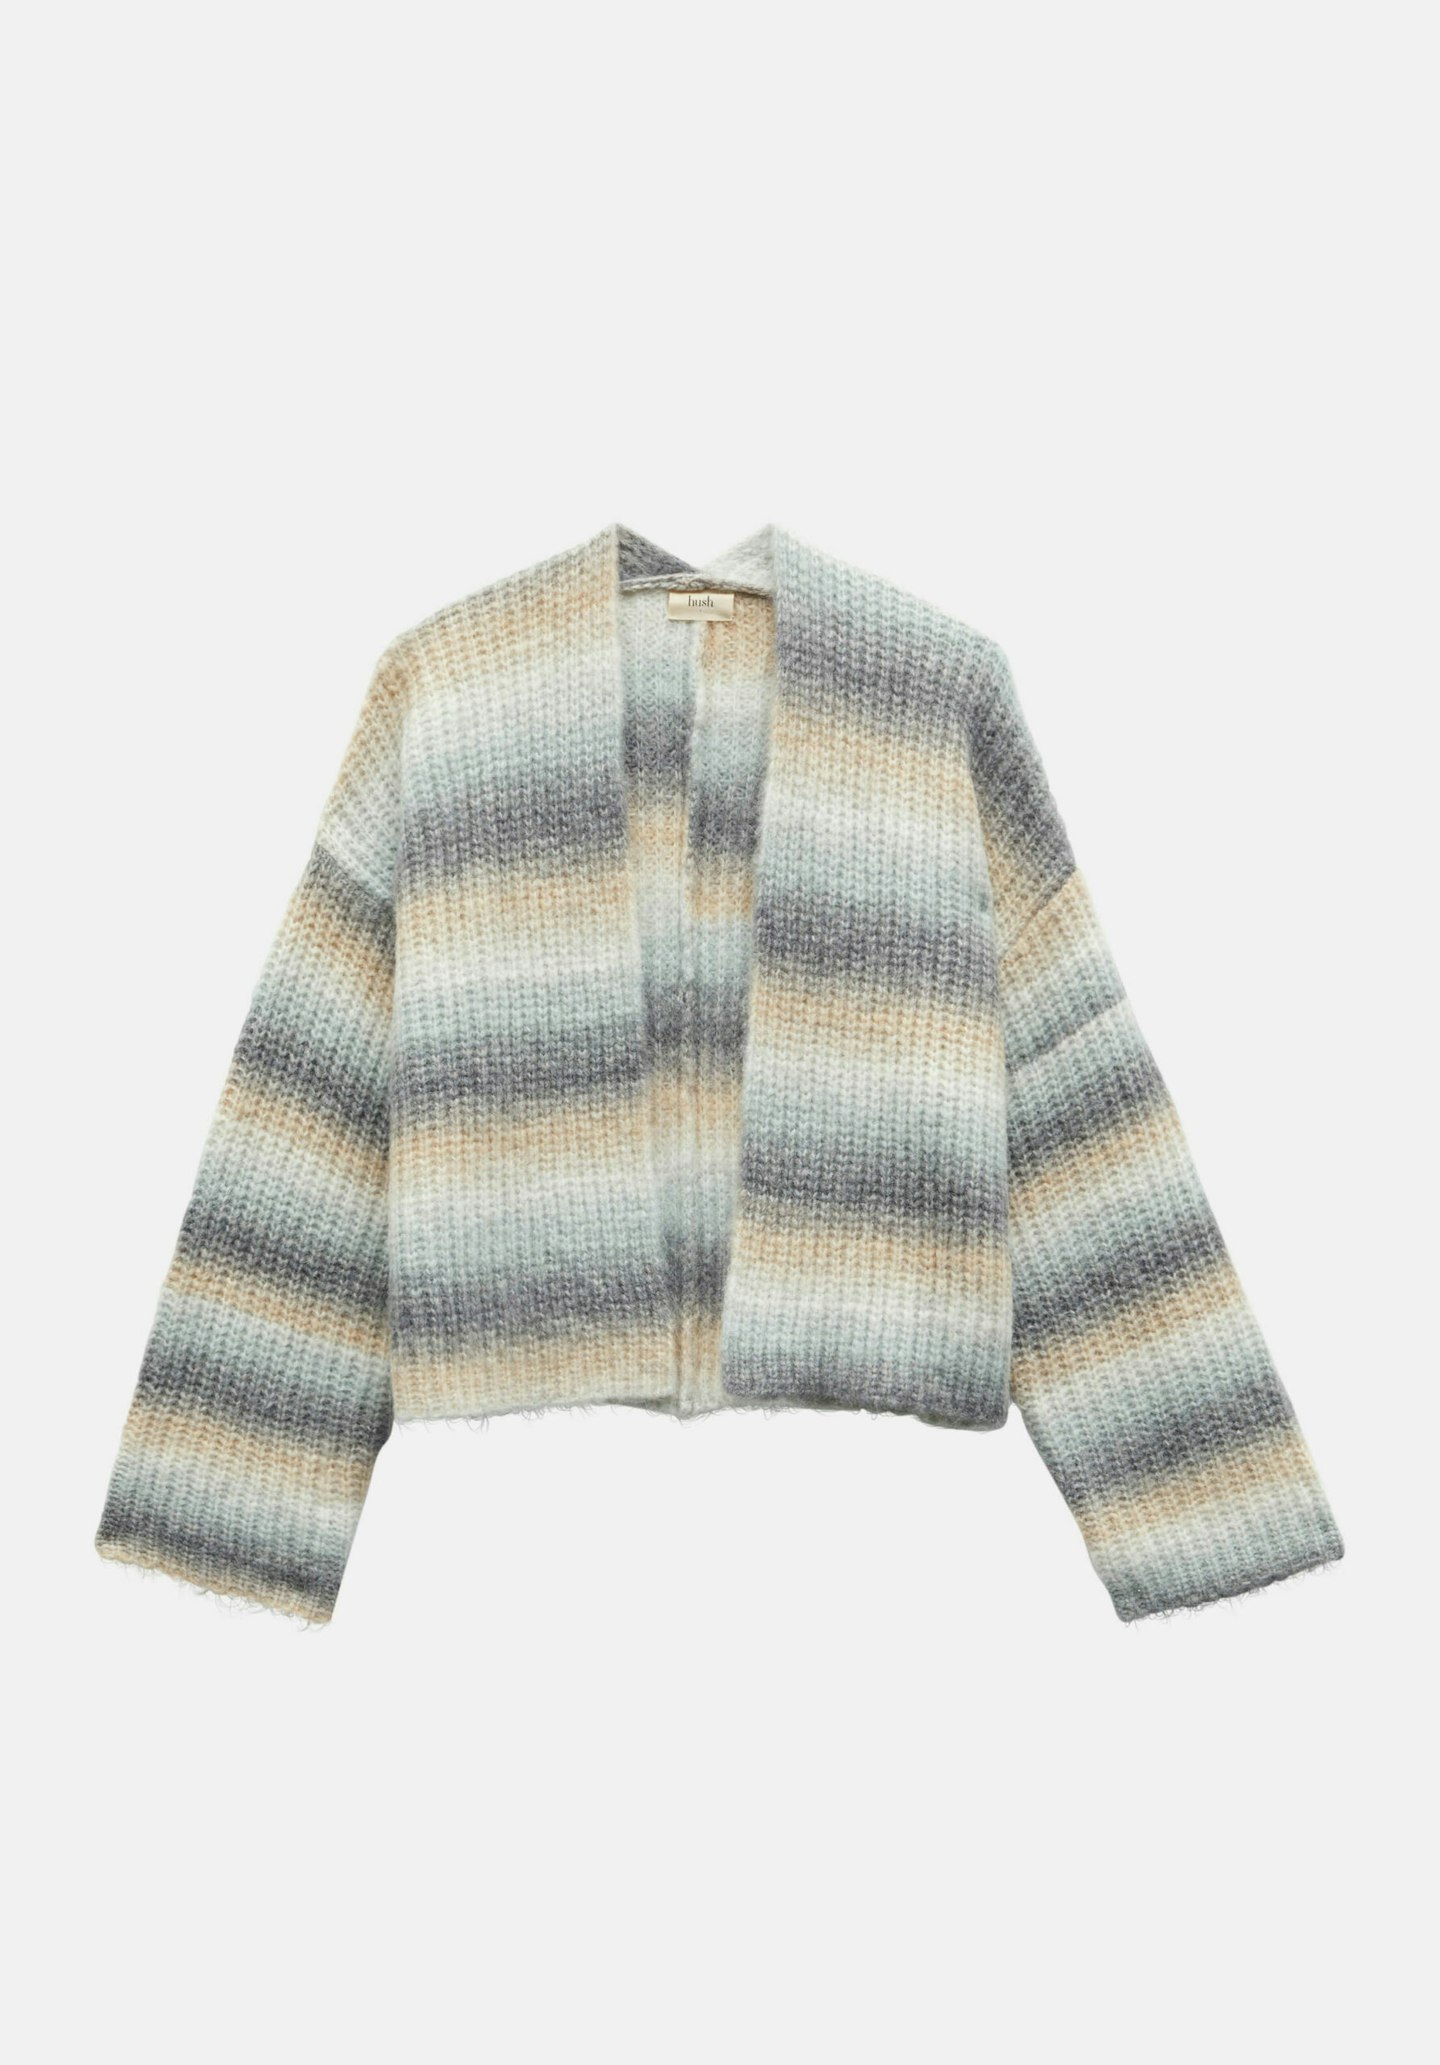 Hush, Fluffy Stripped Ombre Cardigan